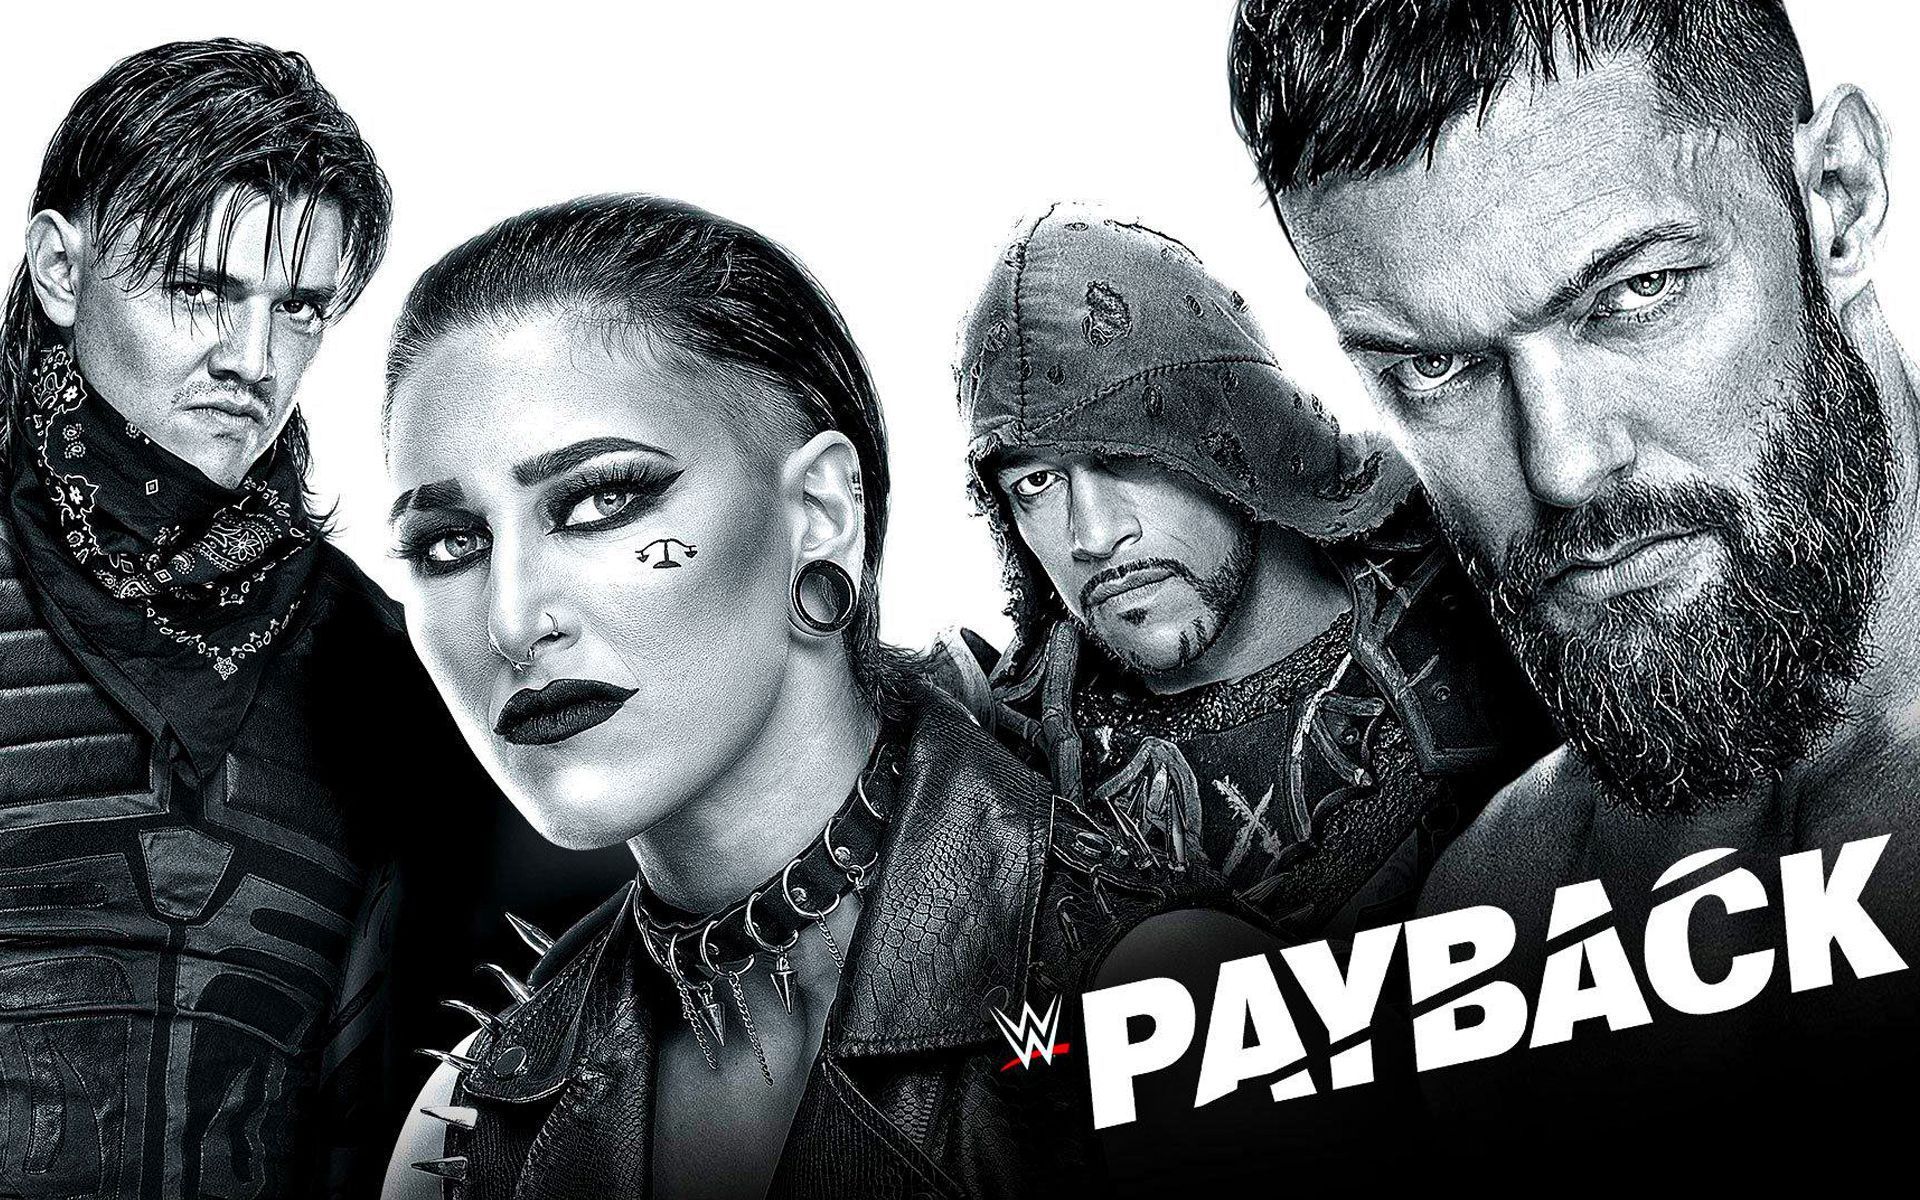 WWE Payback 2023 will take place at PPG Paints Arena in Pittsburgh, PA